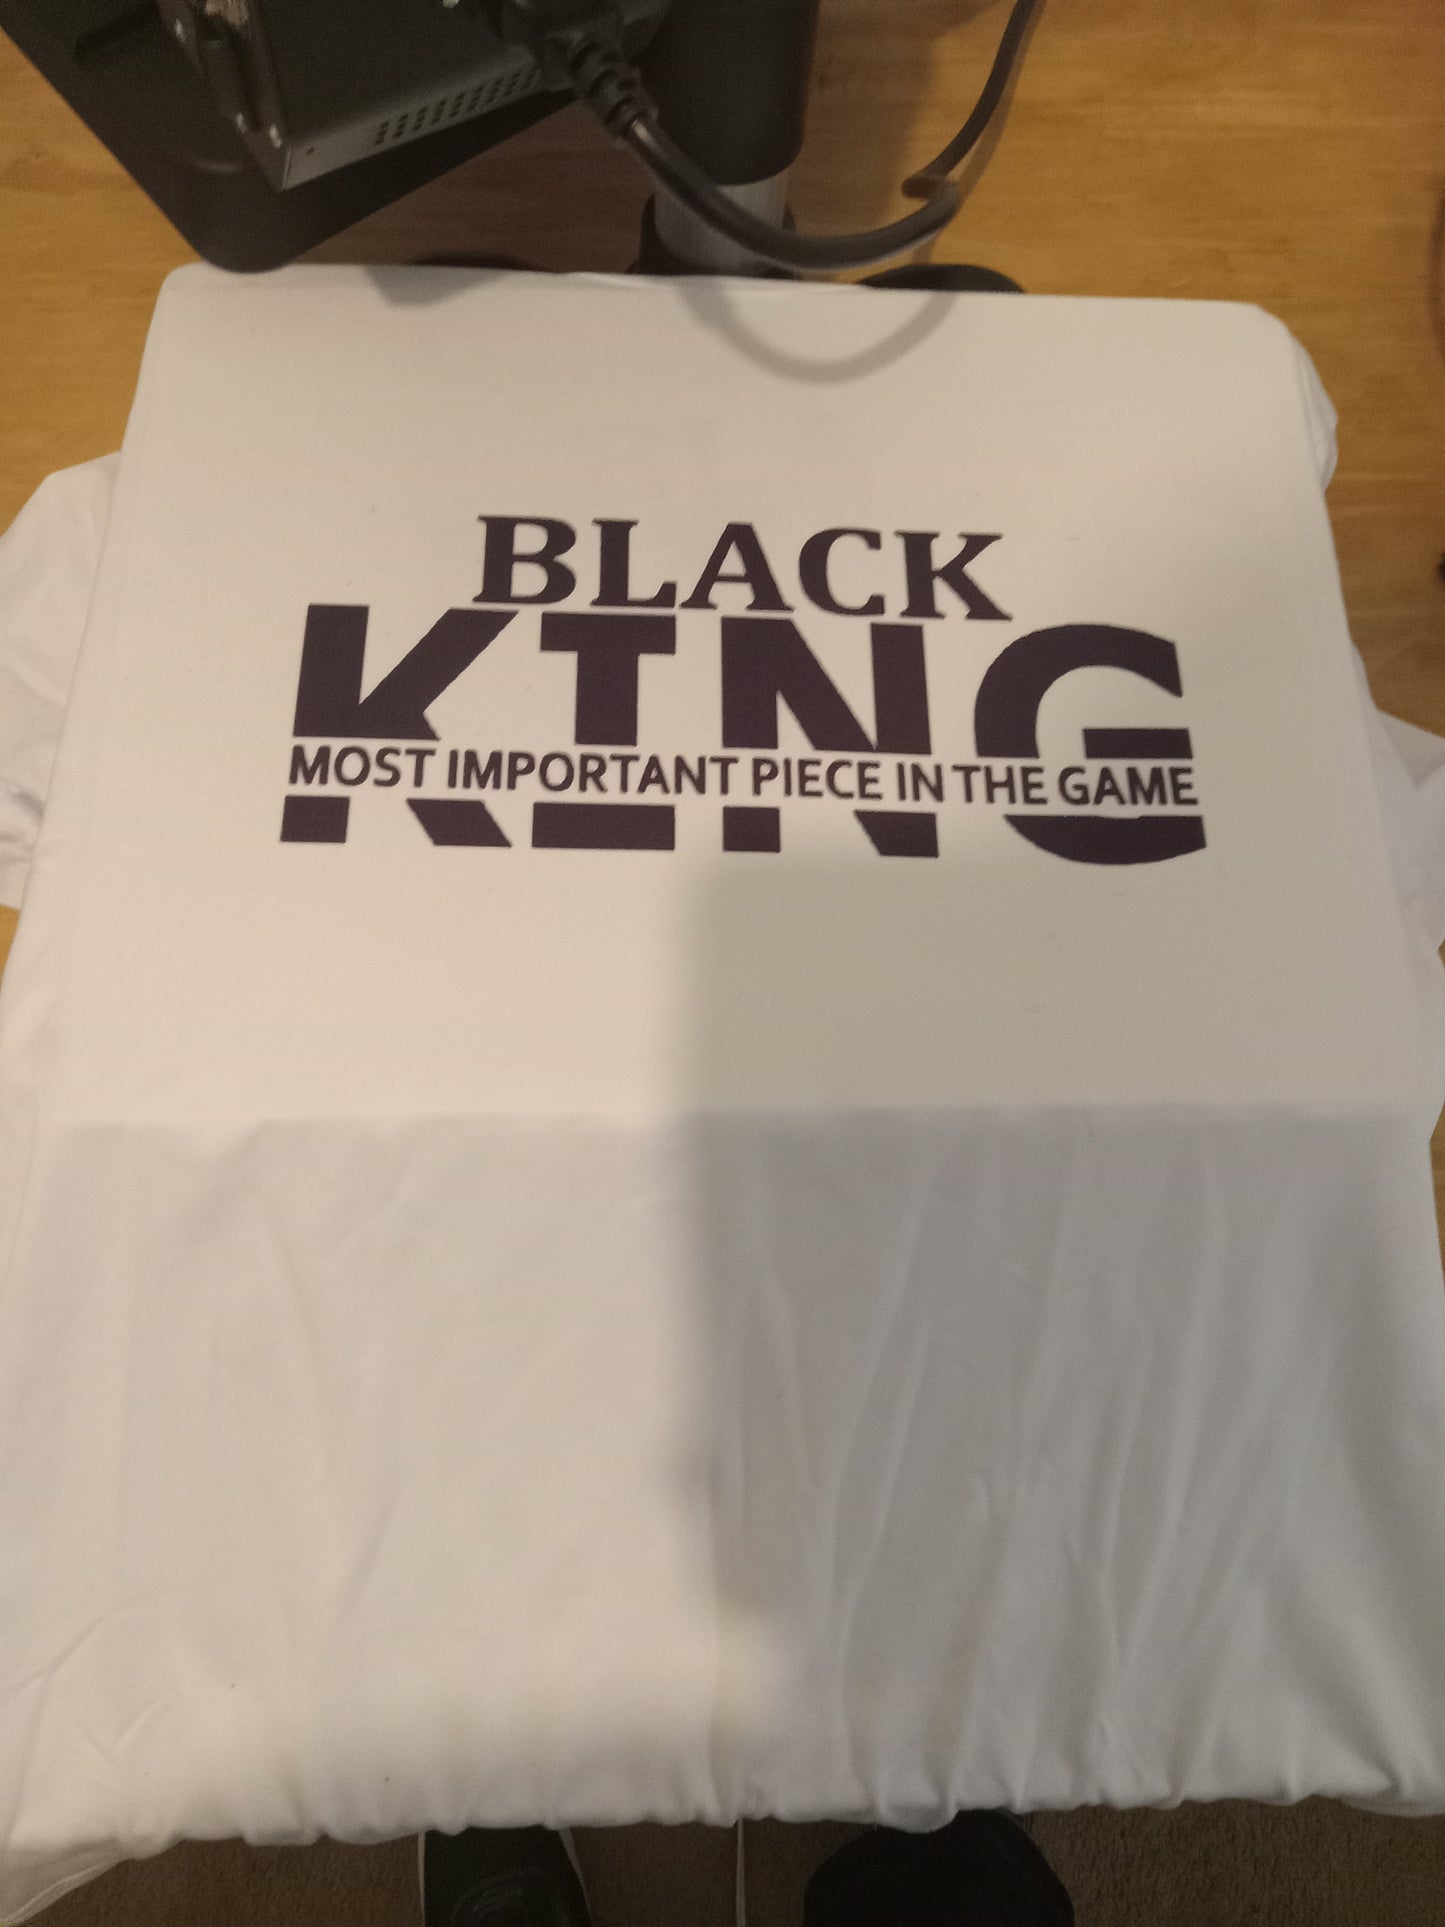 Black King most important